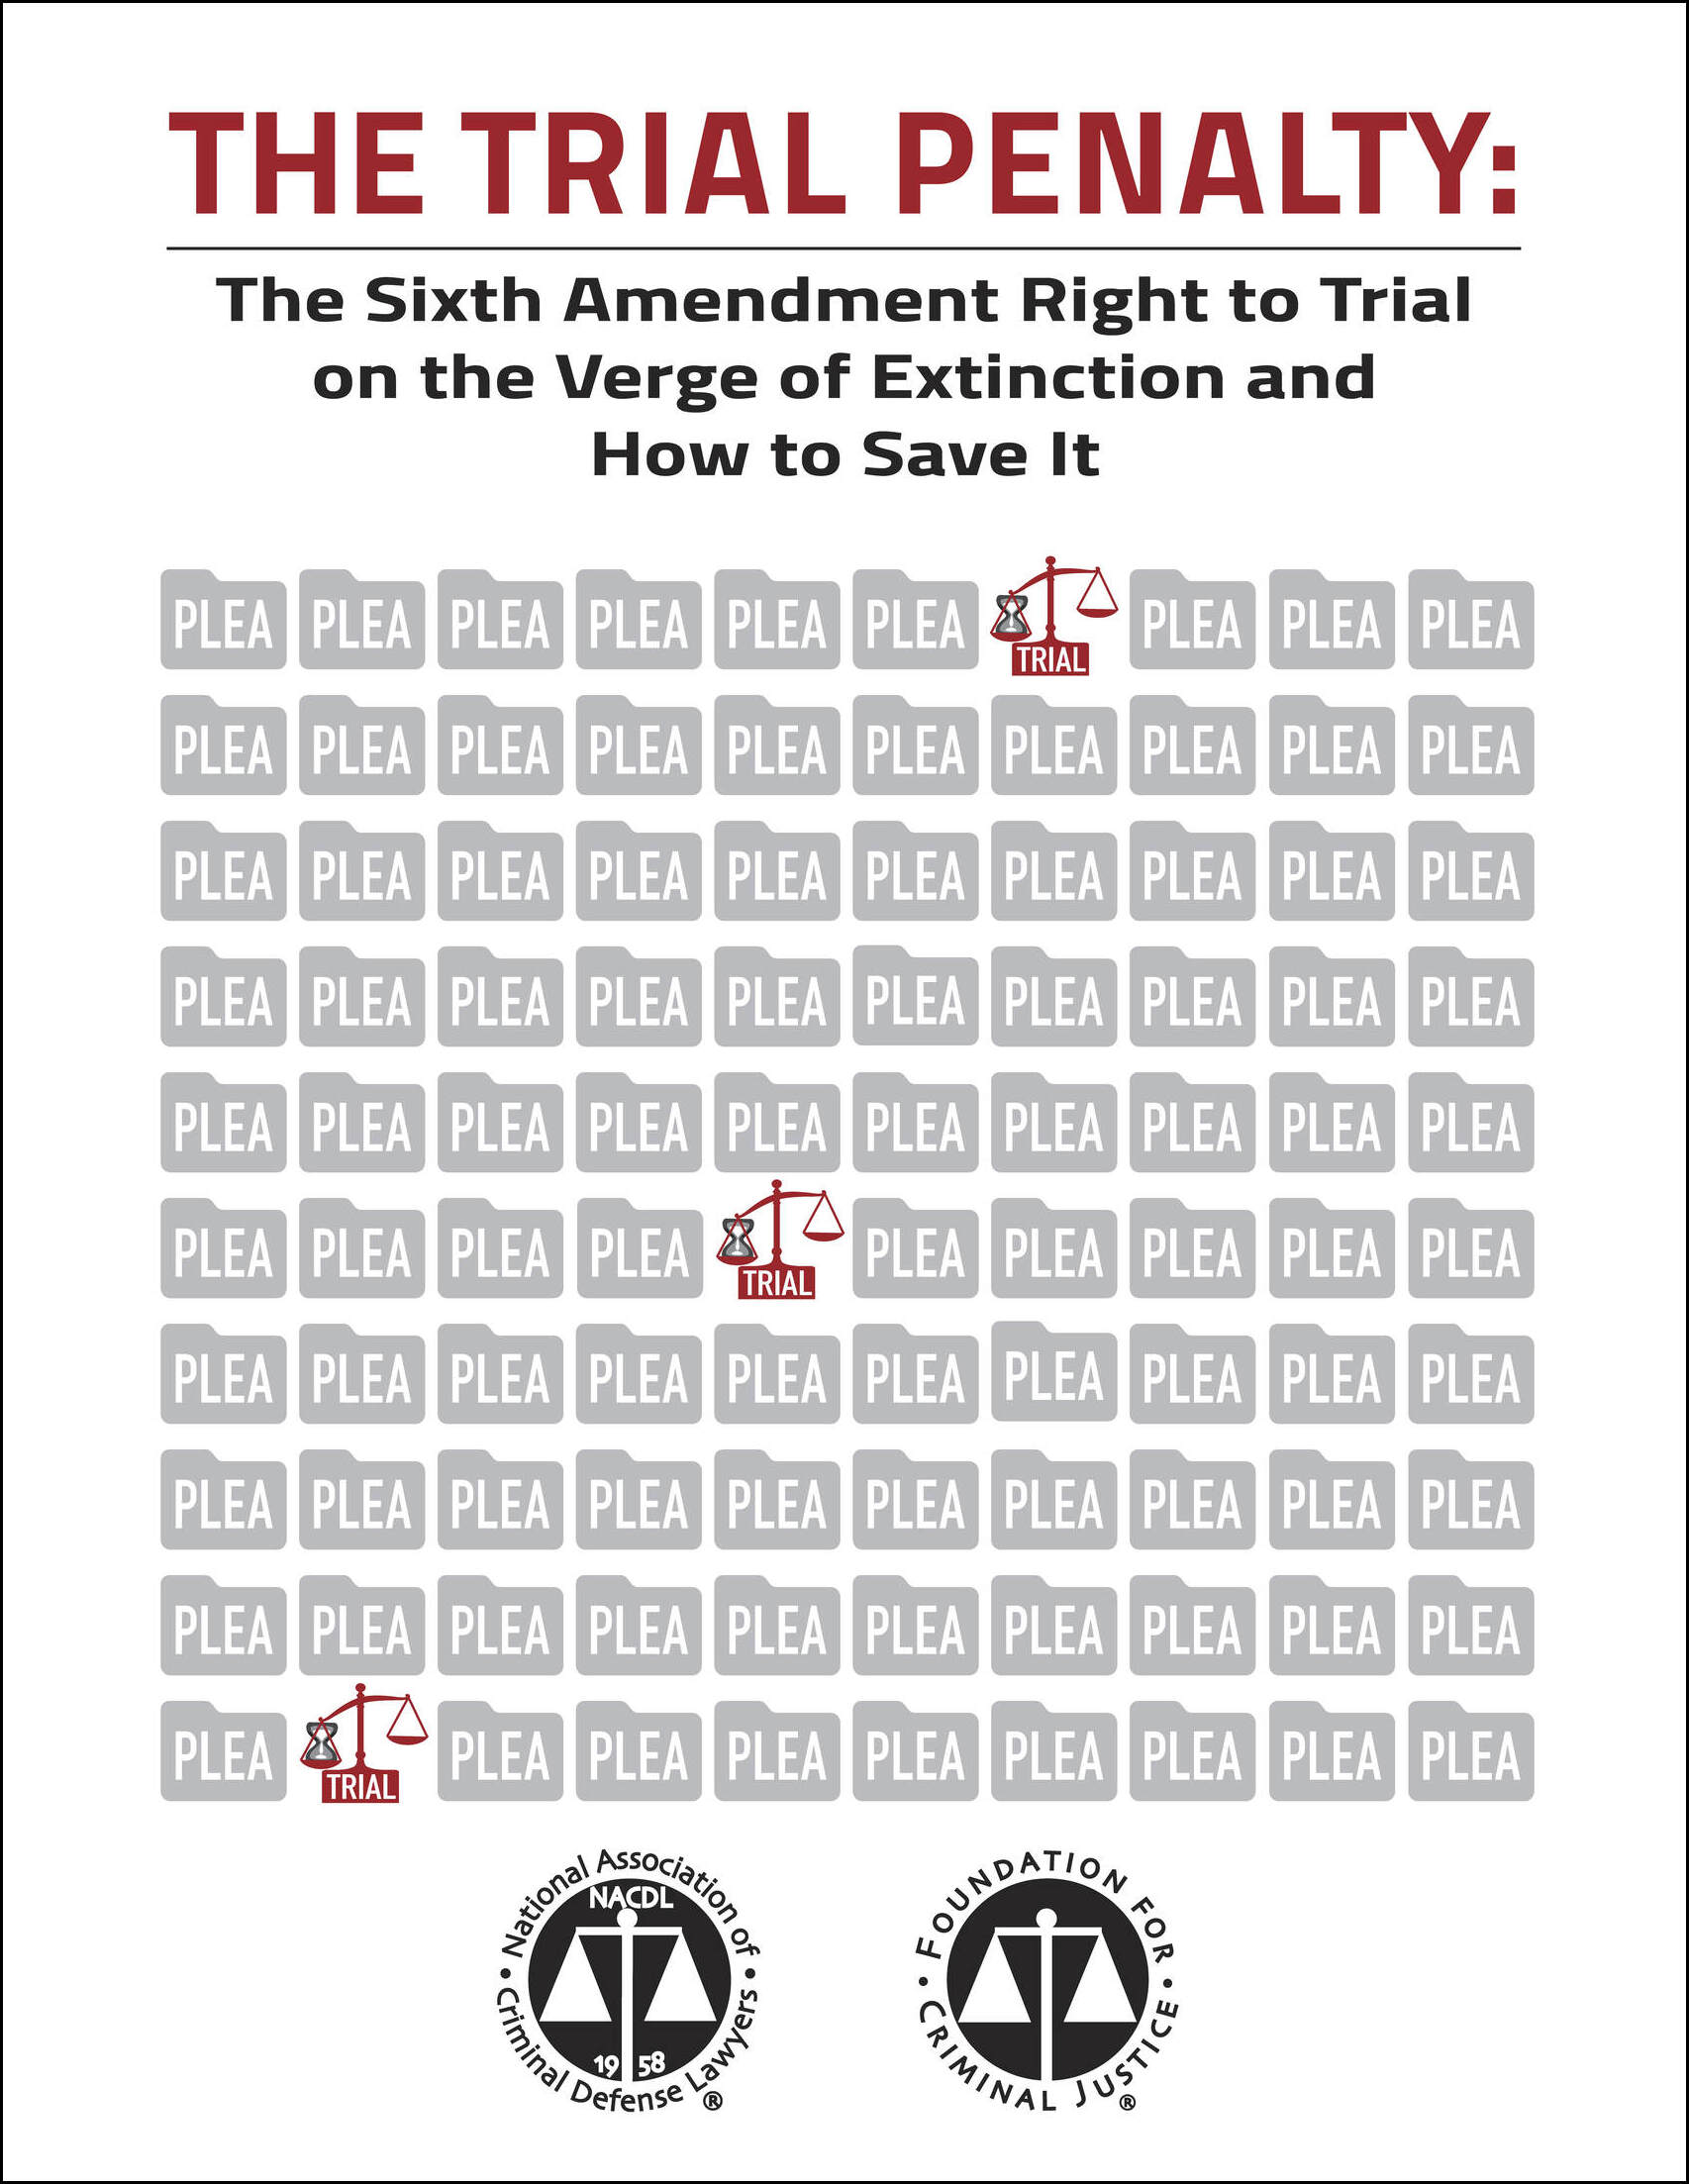 Cover for NACDL report The Trial Penalty: The Sixth Amendment Right to Trial on the Verge of Extinction and How to Save It